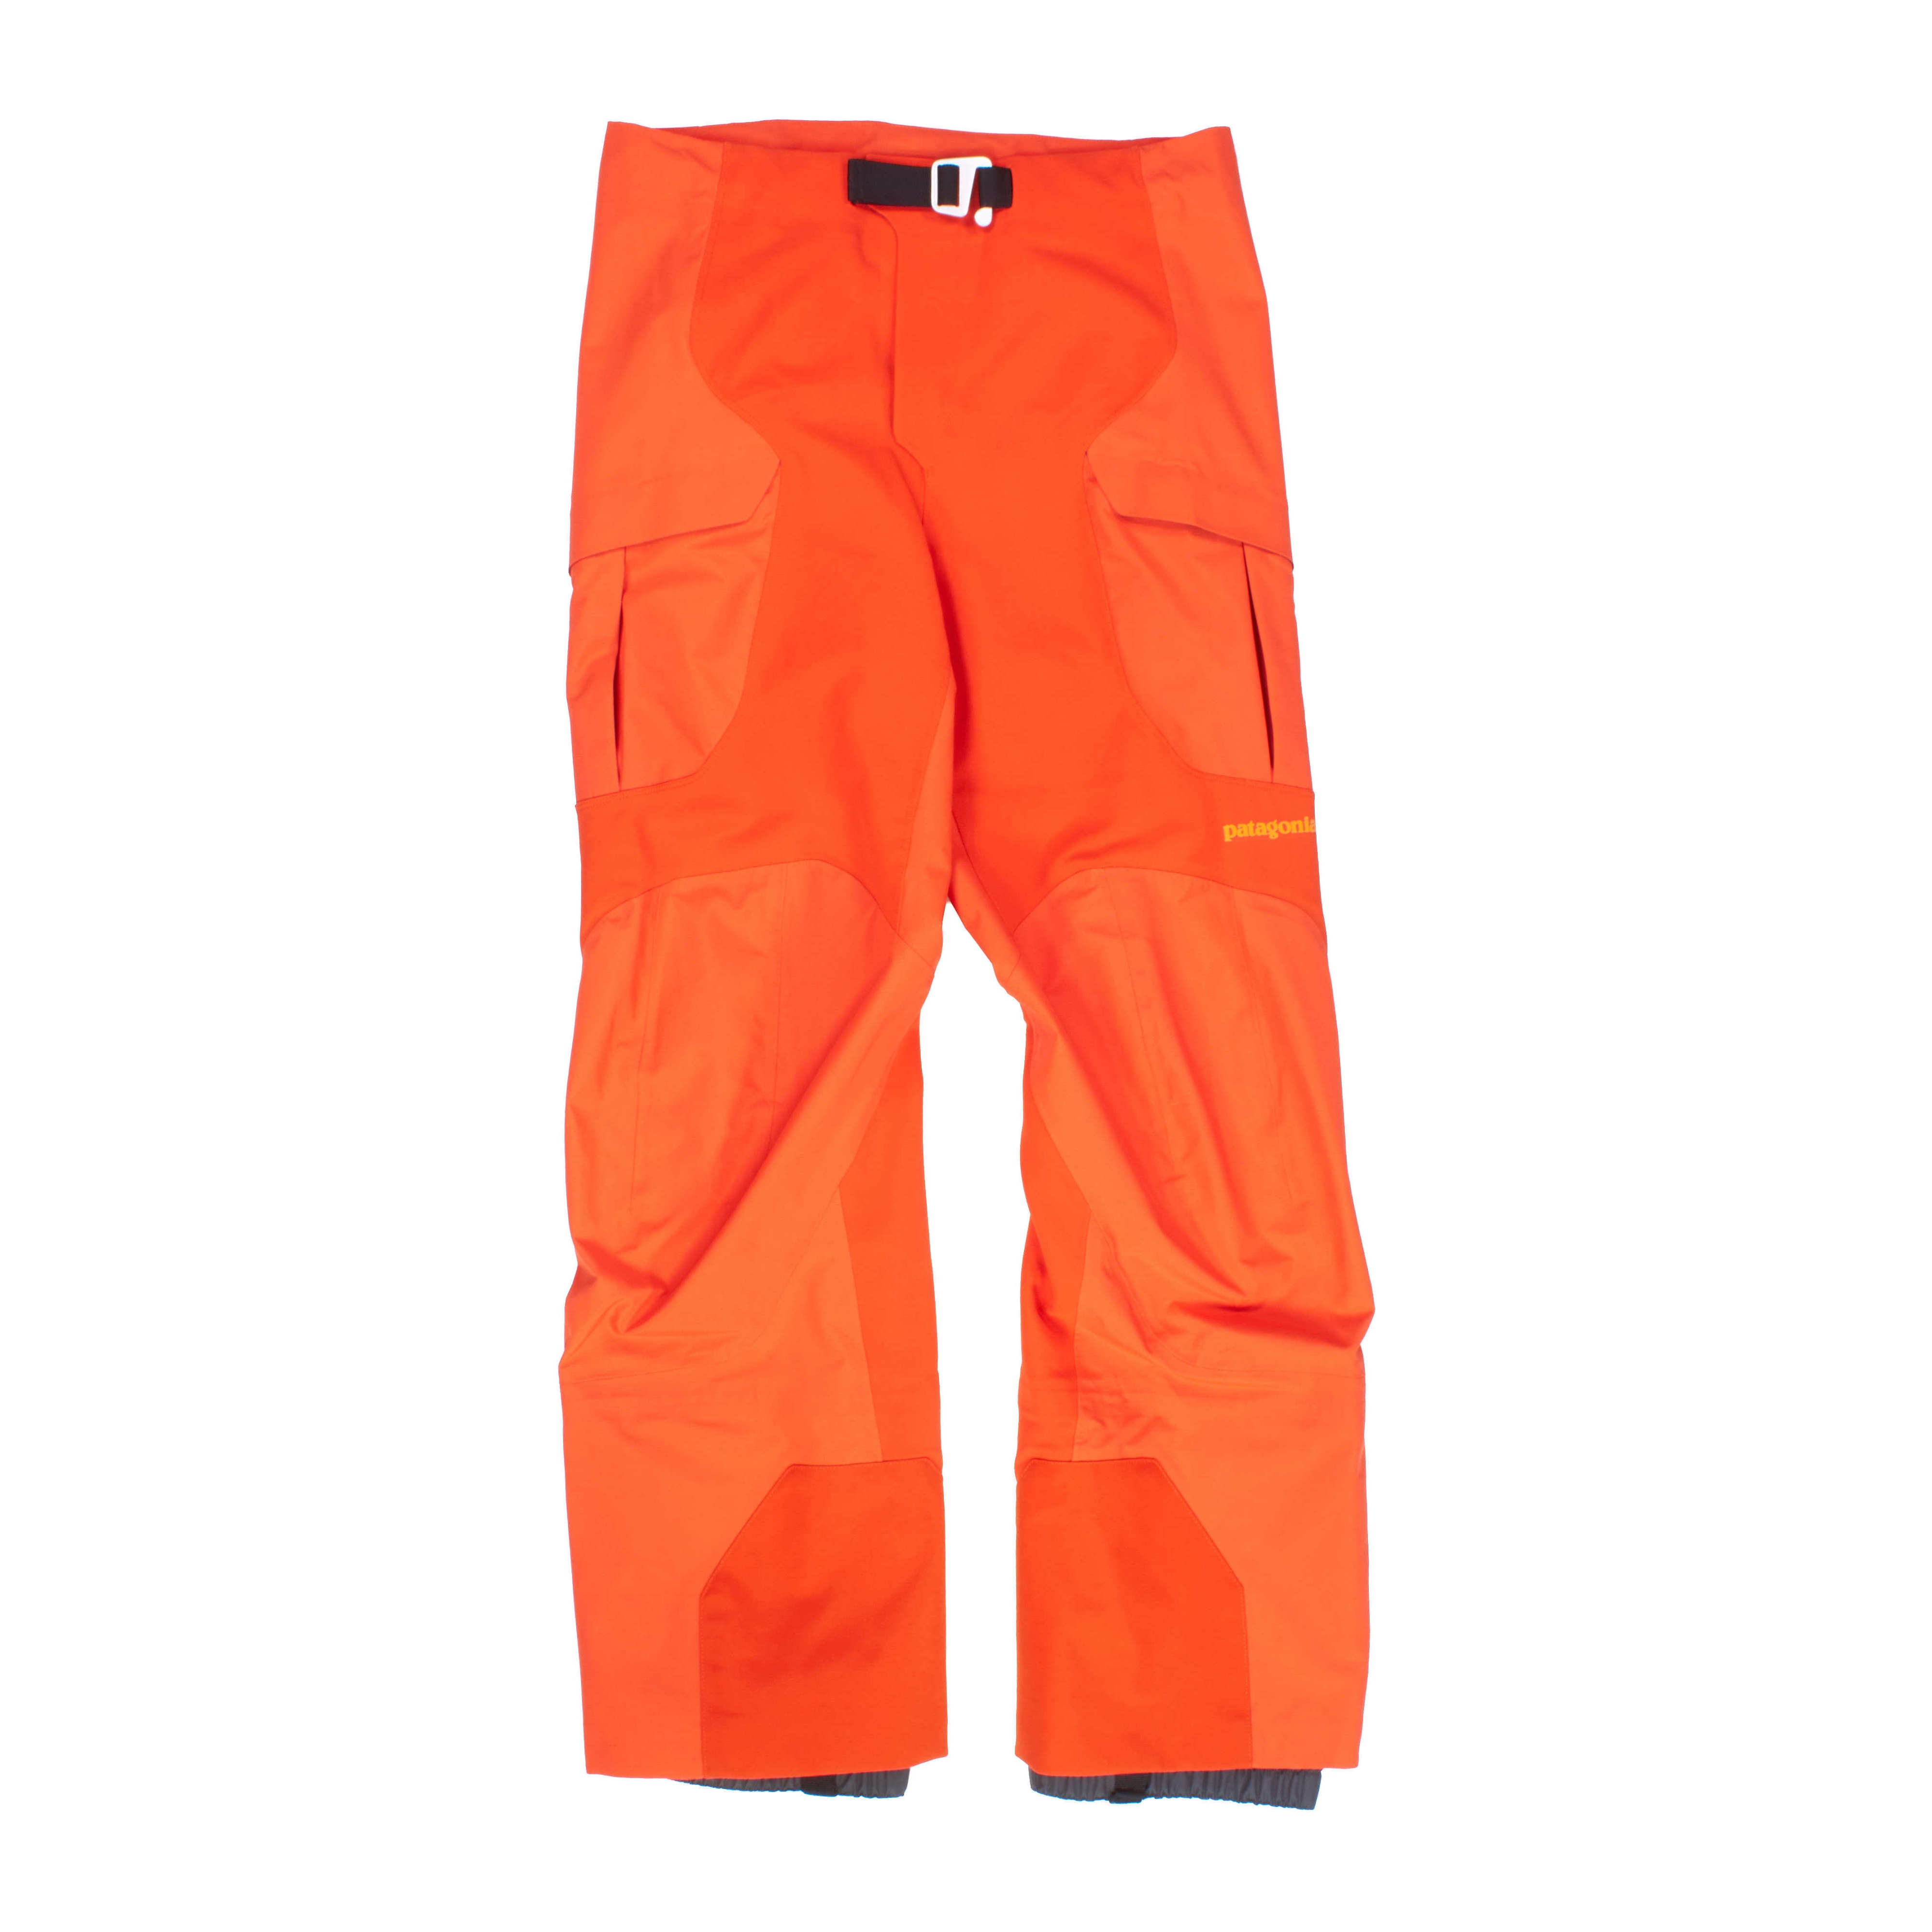 Review: Patagonia Mixed Guide Pants - The Climbing Zine